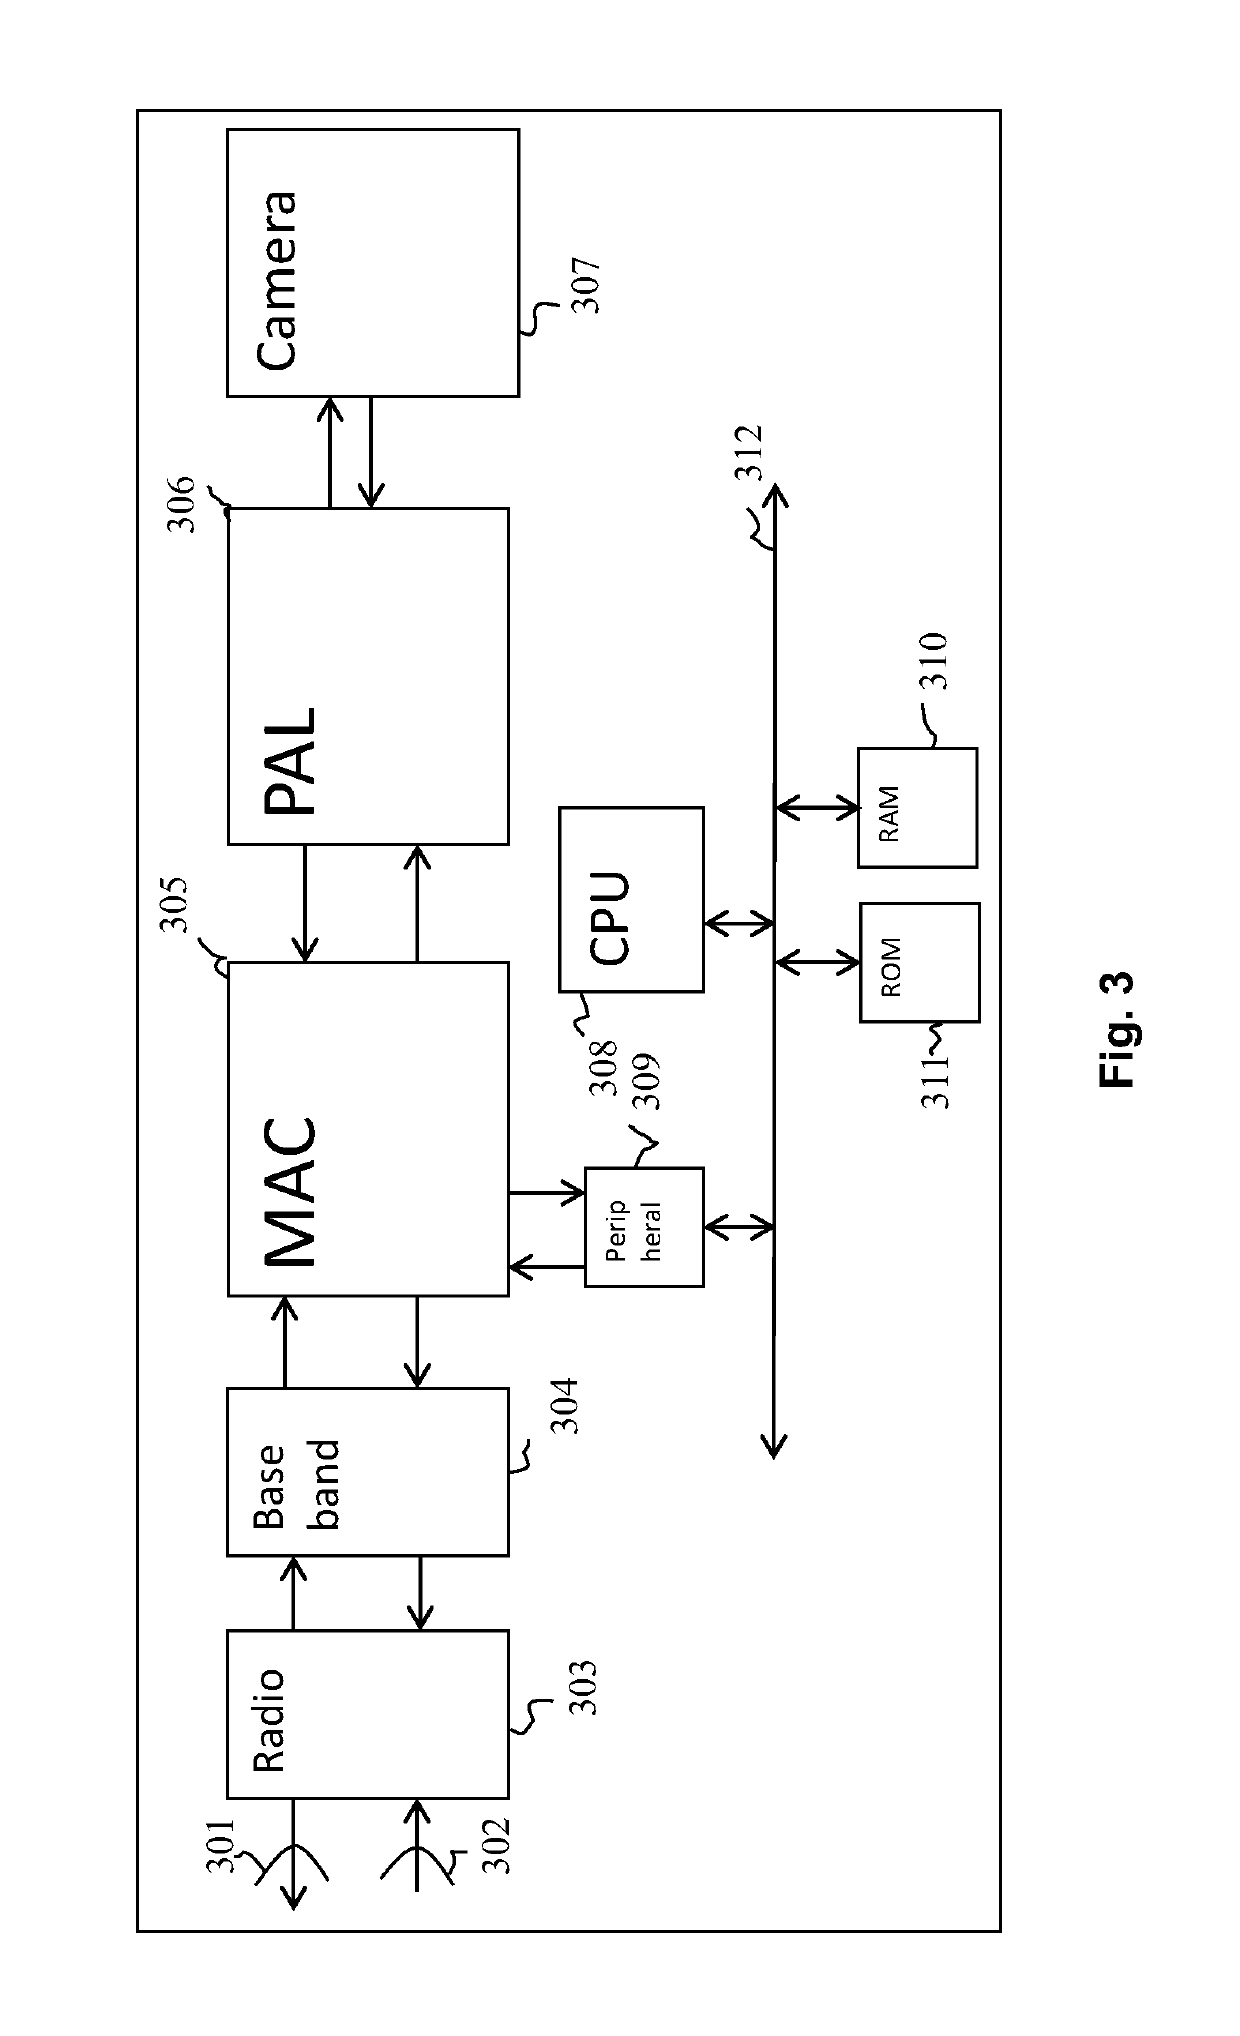 Method and apparatus for transmitting sensor data in a wireless network